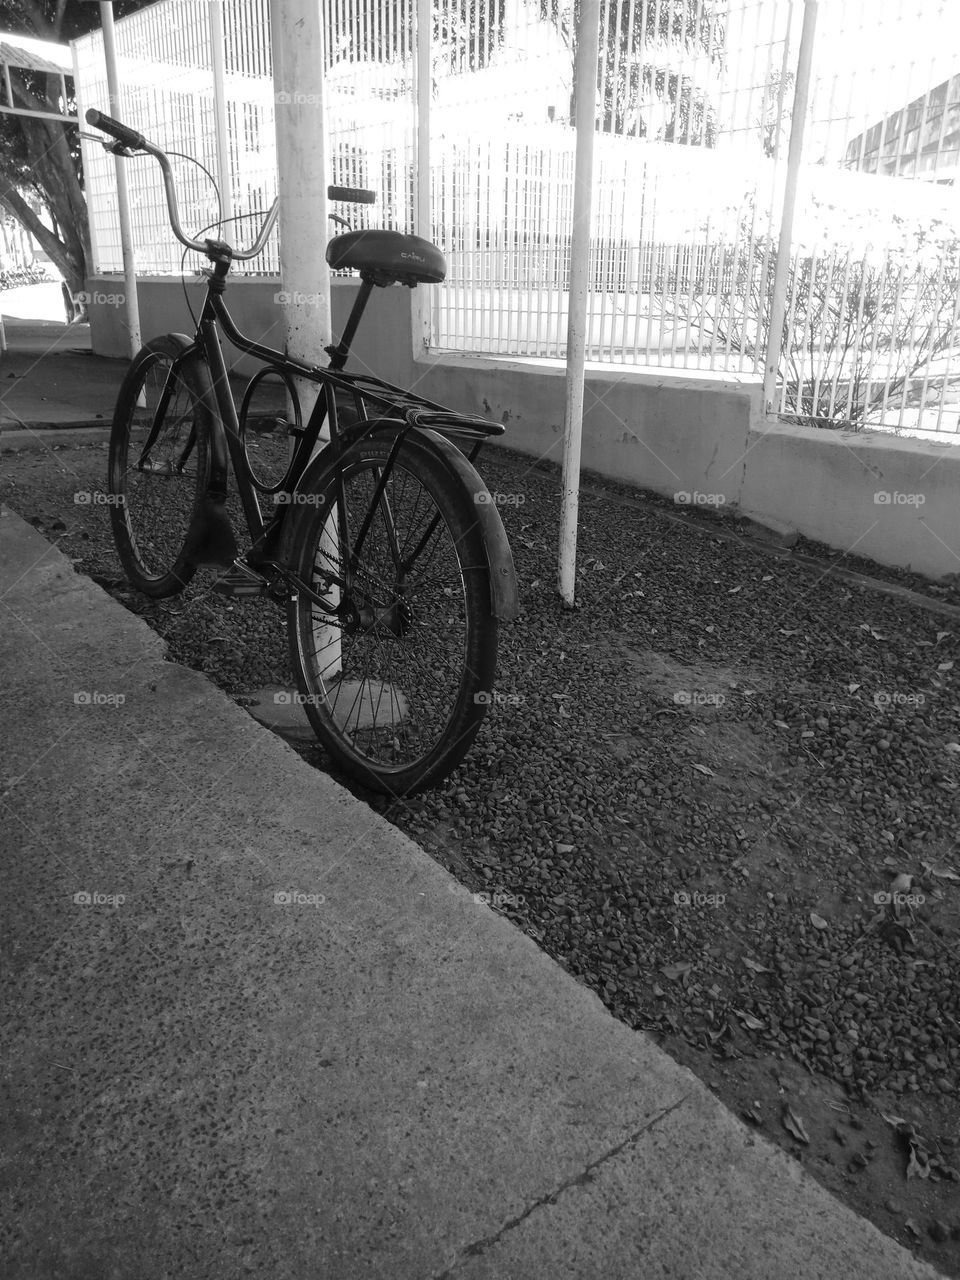 A bicycle by a bus station, black and white